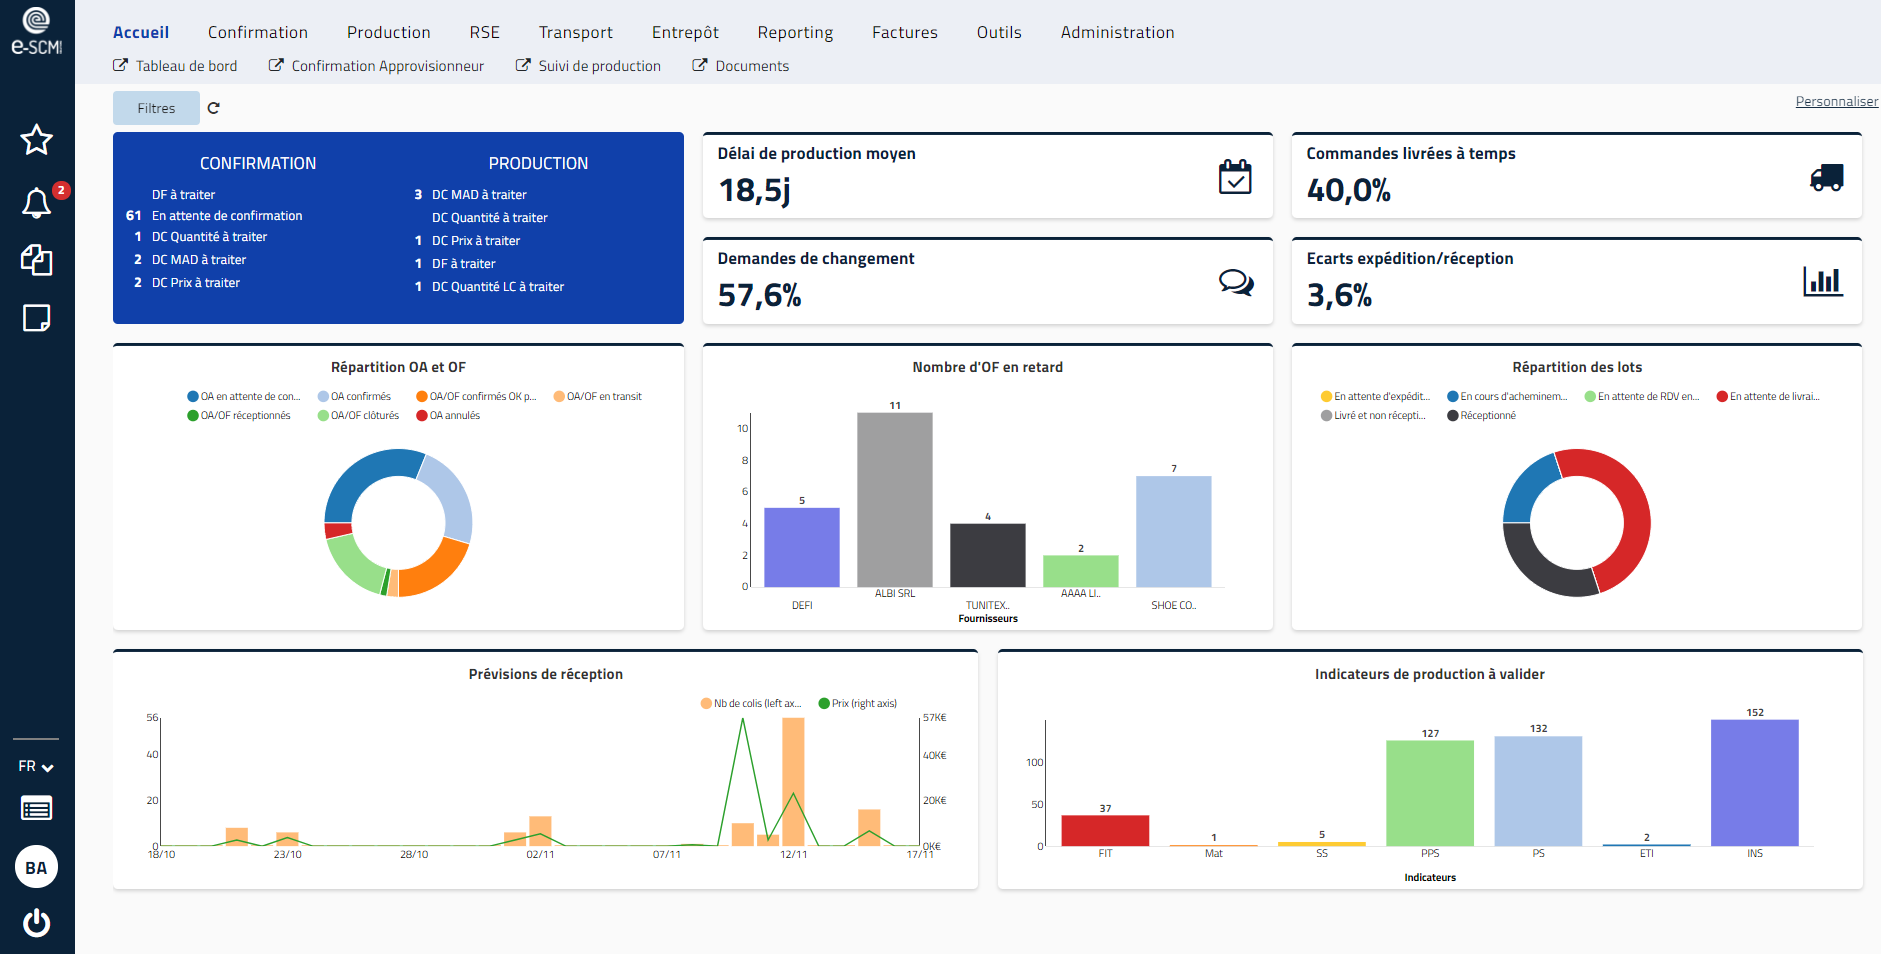 e-SCM Solutions - The e-SCM solutions management console offers customisable dashboards for monitoring the performance indicators of the brand's supply cycle.